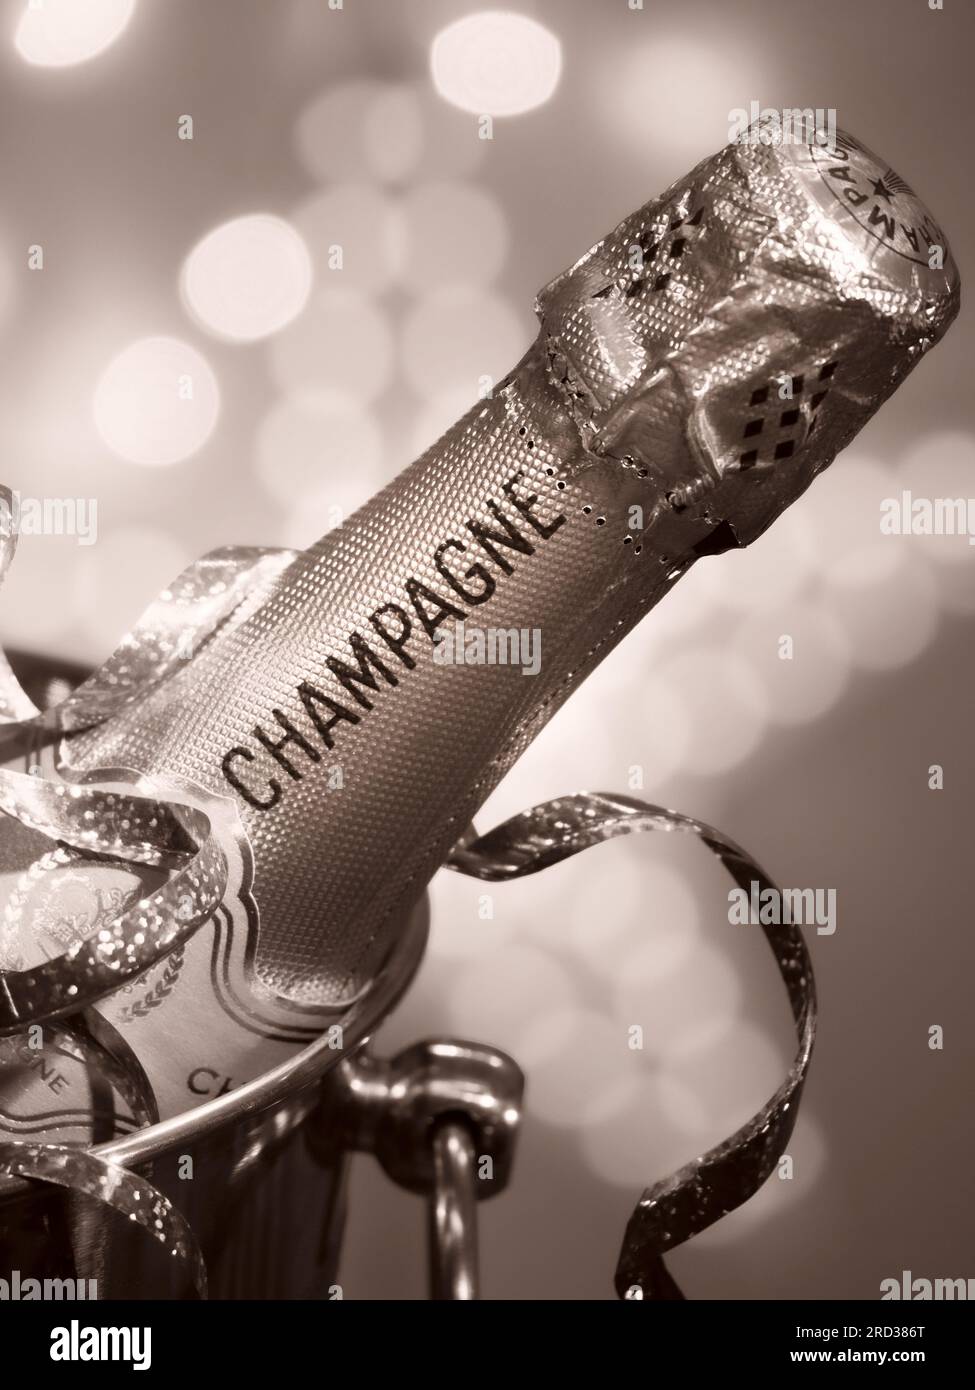 CHAMPAGNE BOTTLE RETRO VINTAGE B&W PARTY LIGHTS  on ice in wine cooler champagne ice bucket, party streamer and sparkling style celebration lights Stock Photo